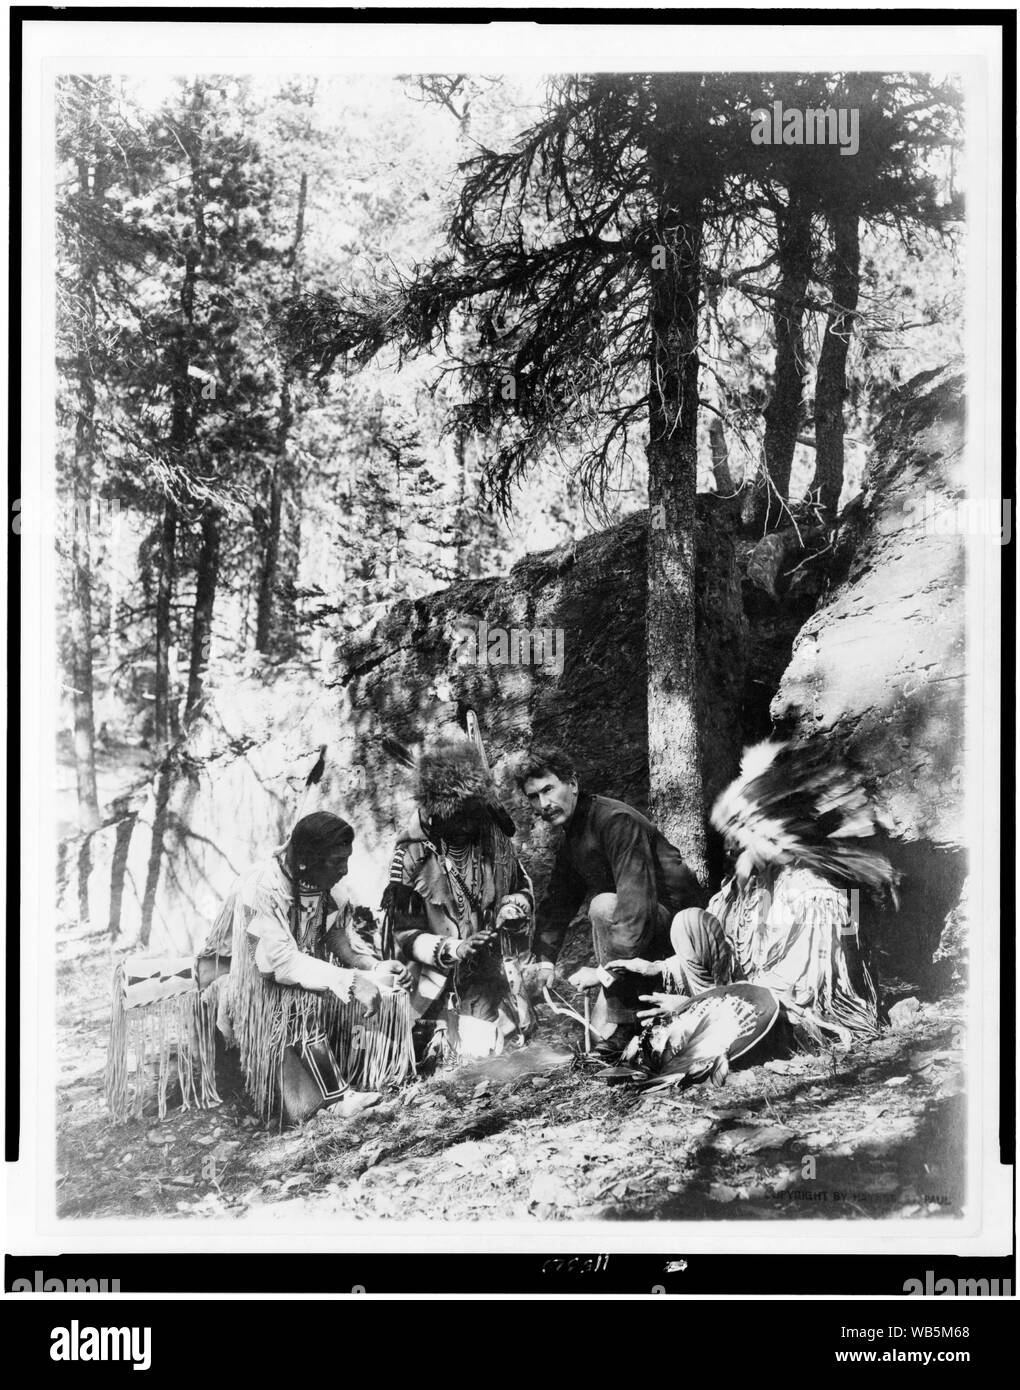 Ernest Thompson Seton, with three Blackfeet Indians, demonstrating how to start a fire using a bow and a stick, rocks and trees in background Abstract/medium: 1 photographic print. Stock Photo